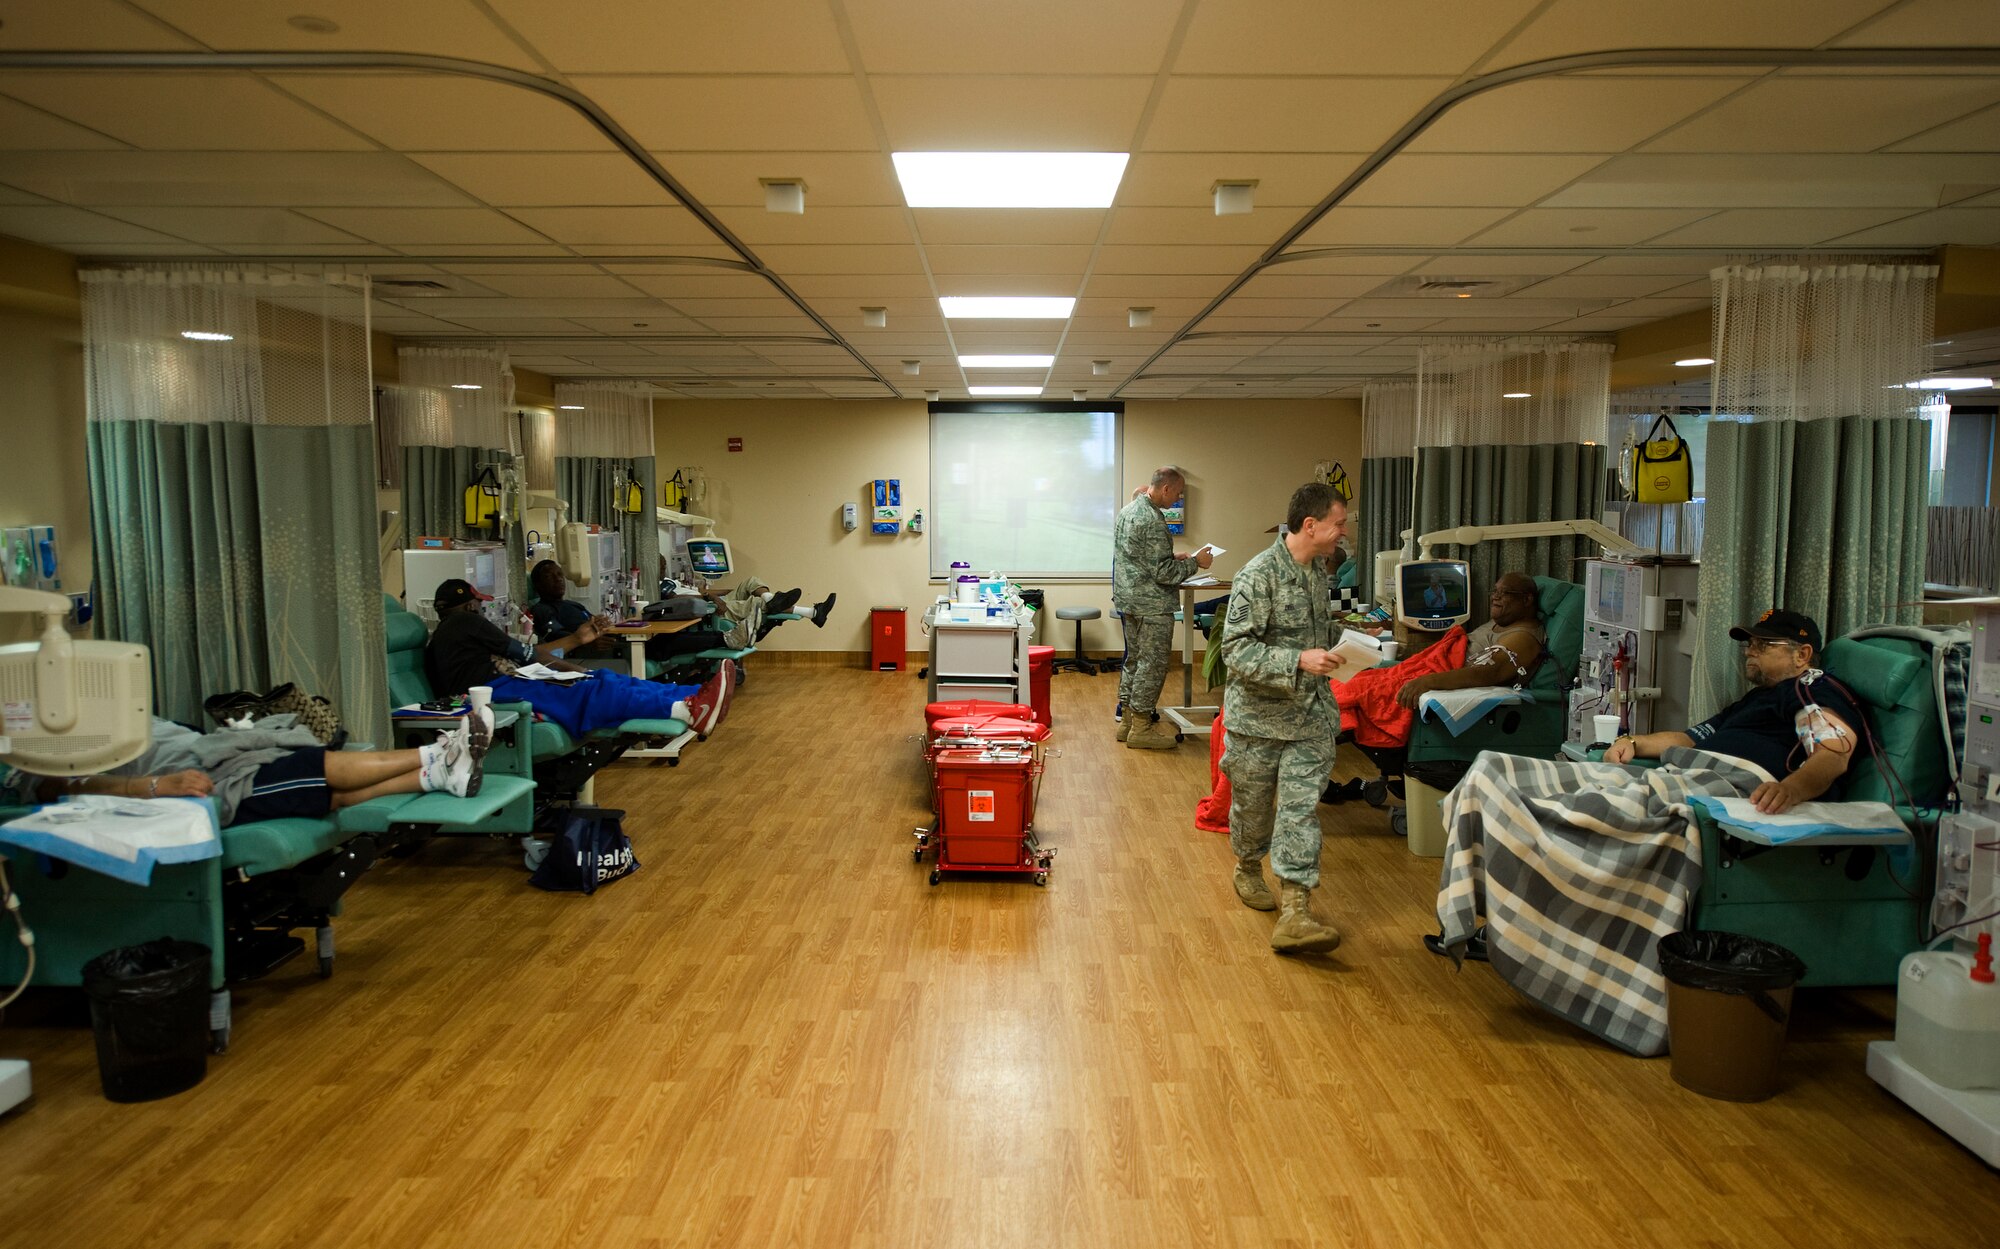 The 16-chair, $1.6 million Hemodialysis Center at the David Grant USAF Medical Center at Travis Air Force Base, Calif., is the largest Department of Defense/Veterans Affairs operation of its kind for either organization. (U.S. Air Force photo/Tech. Sgt. Bennie J. Davis III)